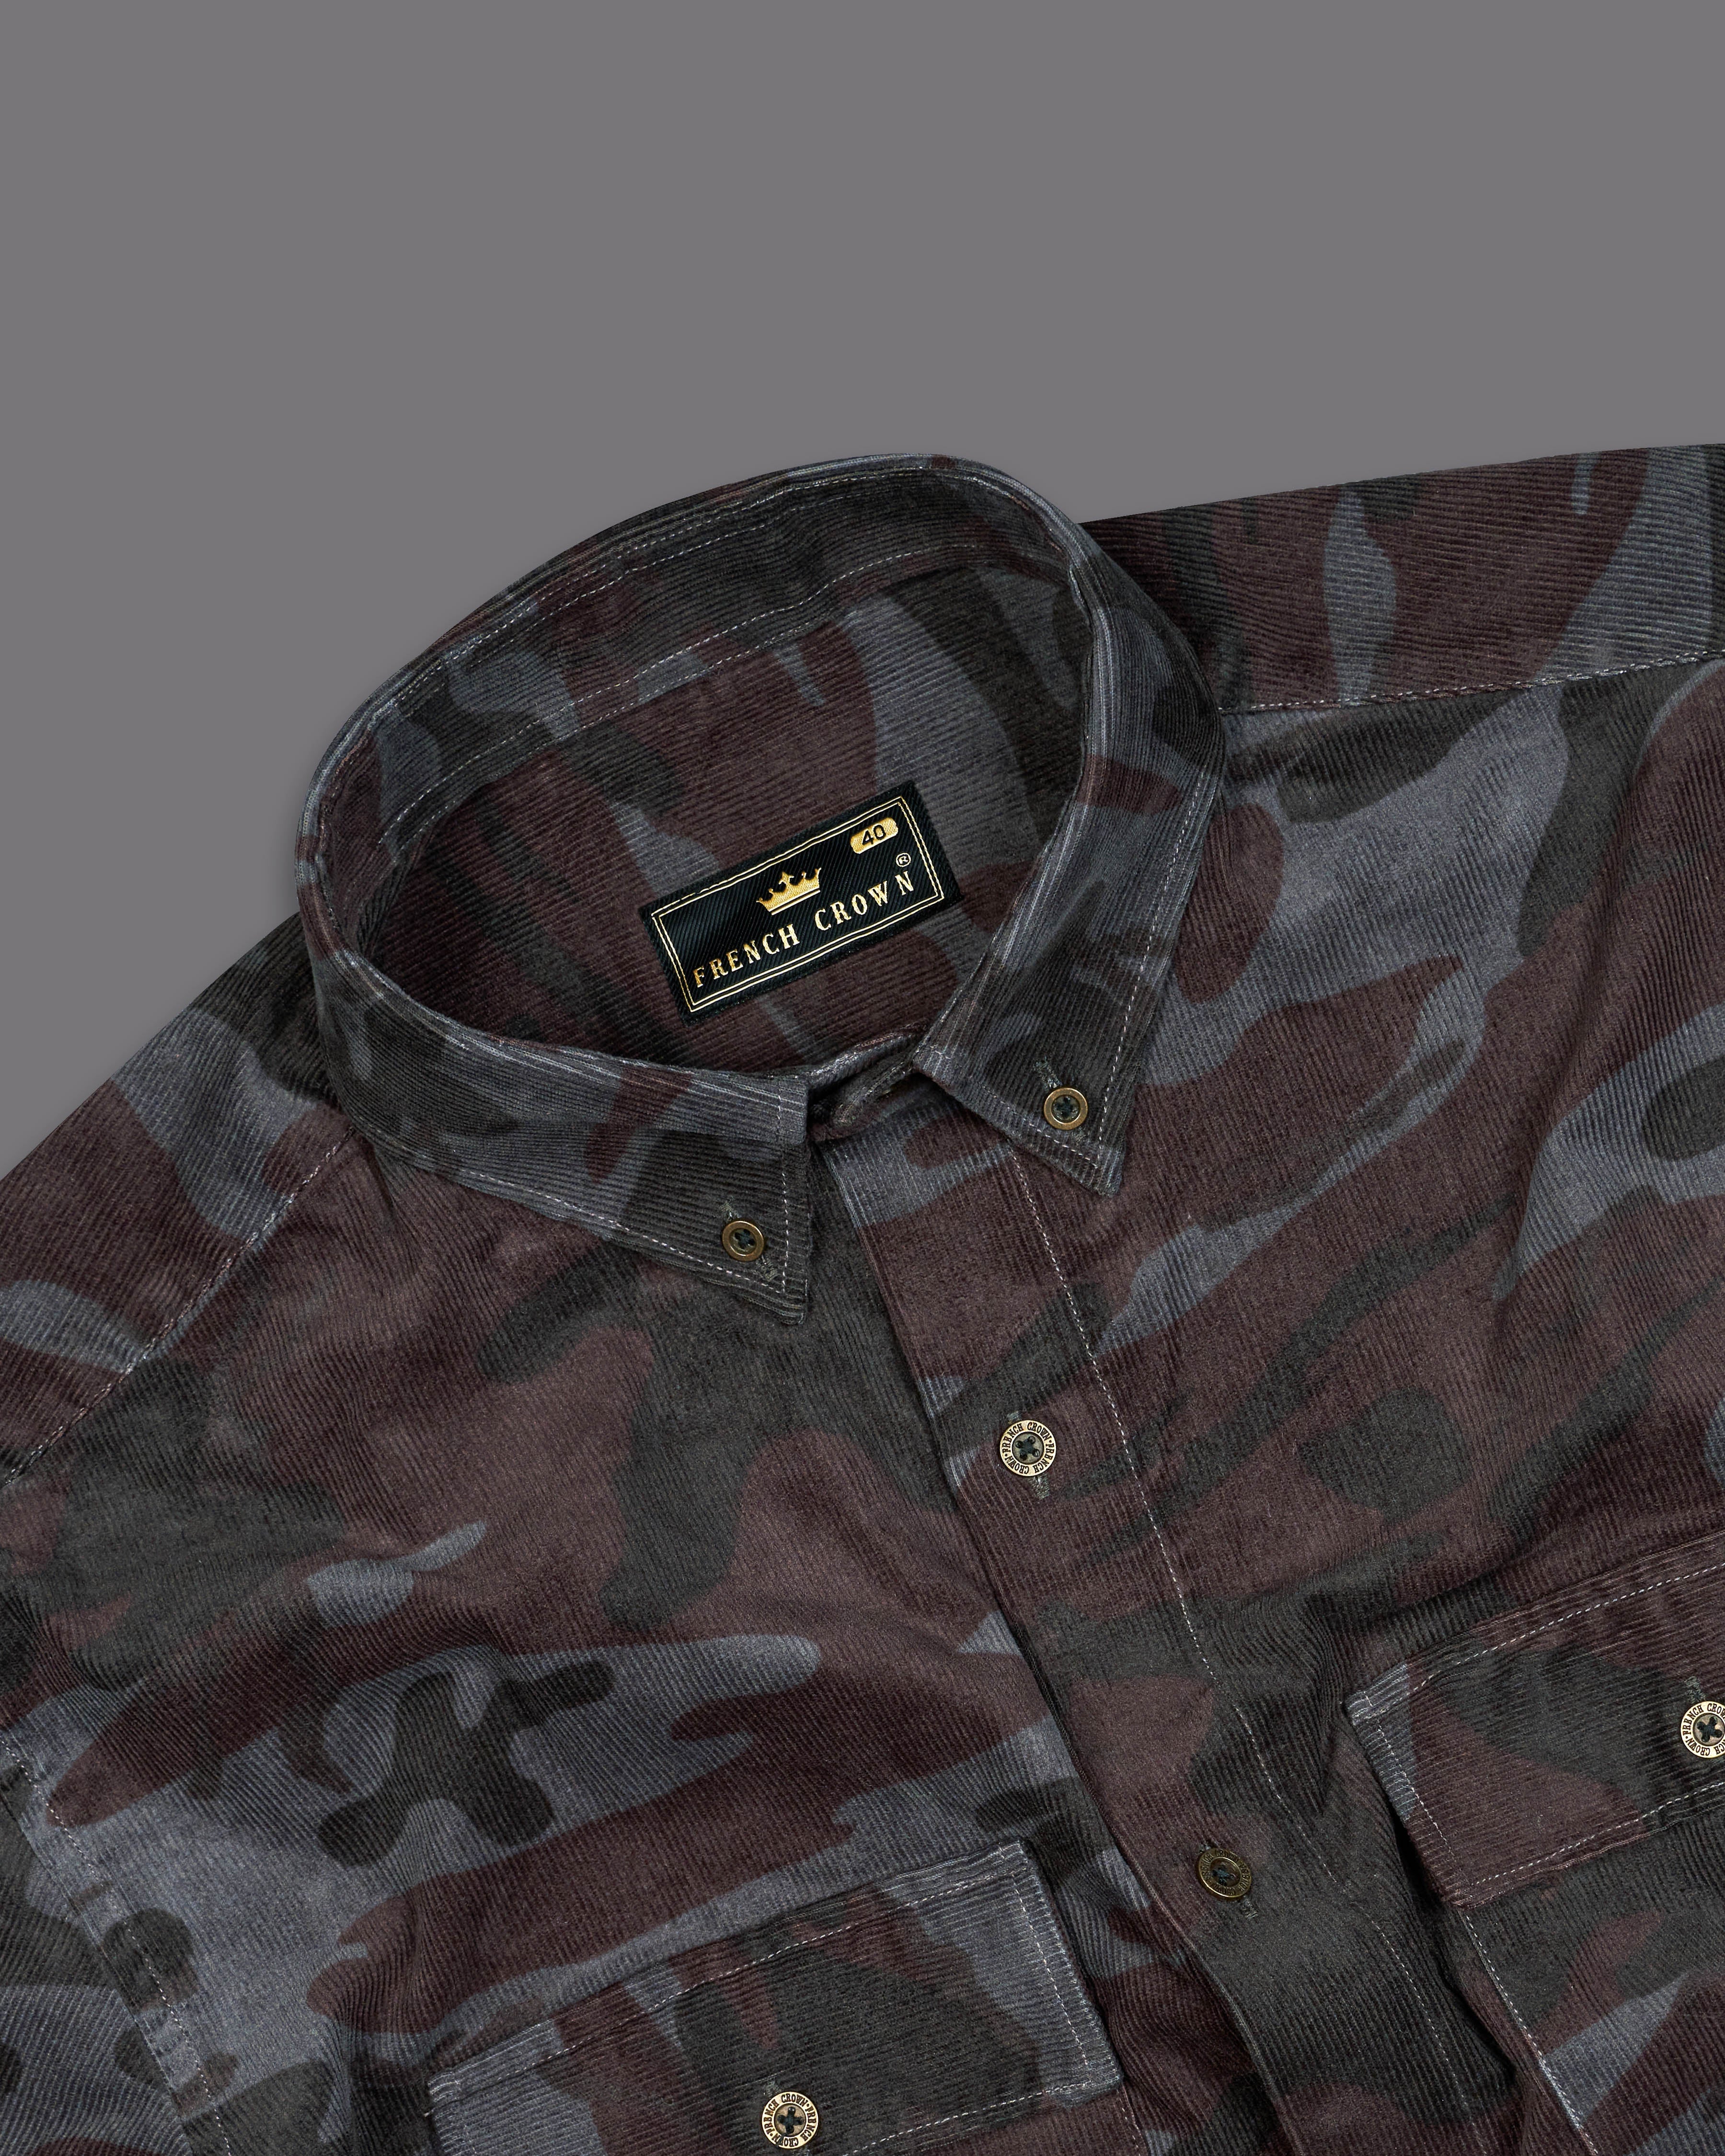 Cape Cod Gray and Bistre Brown Camouflage Corduroy Designer Shirt 10174-BD-MB-D123-38, 10174-BD-MB-D123-H-38, 10174-BD-MB-D123-39, 10174-BD-MB-D123-H-39, 10174-BD-MB-D123-40, 10174-BD-MB-D123-H-40, 10174-BD-MB-D123-42, 10174-BD-MB-D123-H-42, 10174-BD-MB-D123-44, 10174-BD-MB-D123-H-44, 10174-BD-MB-D123-46, 10174-BD-MB-D123-H-46, 10174-BD-MB-D123-48, 10174-BD-MB-D123-H-48, 10174-BD-MB-D123-50, 10174-BD-MB-D123-H-50, 10174-BD-MB-D123-52, 10174-BD-MB-D123-H-52